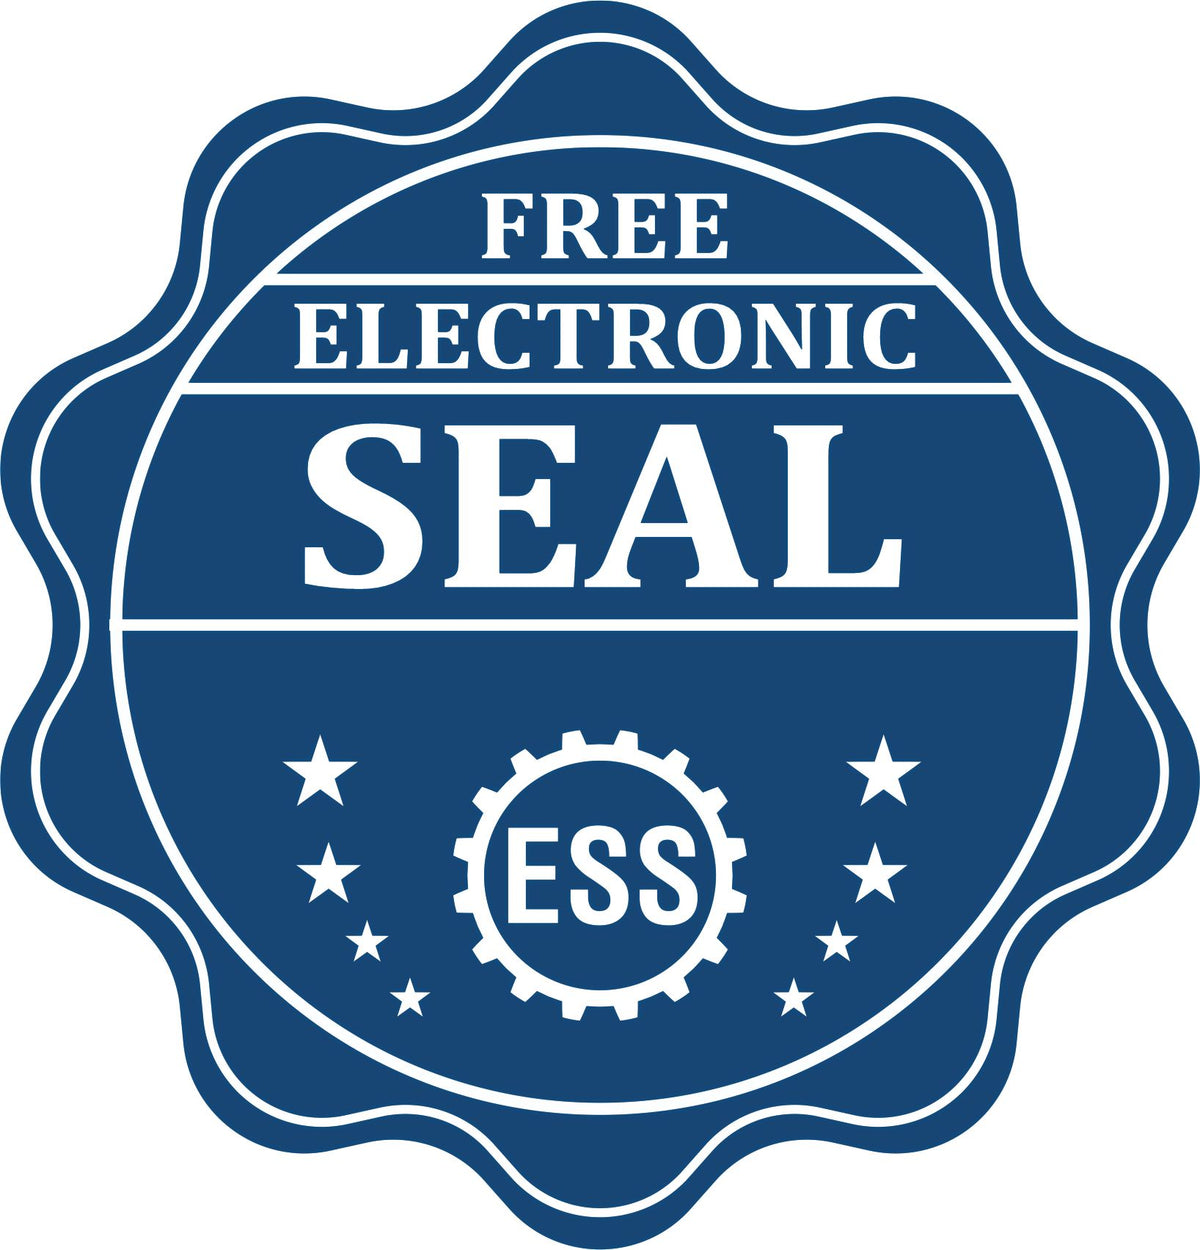 A badge showing a free electronic seal for the State of Indiana Long Reach Architectural Embossing Seal with stars and the ESS gear on the emblem.